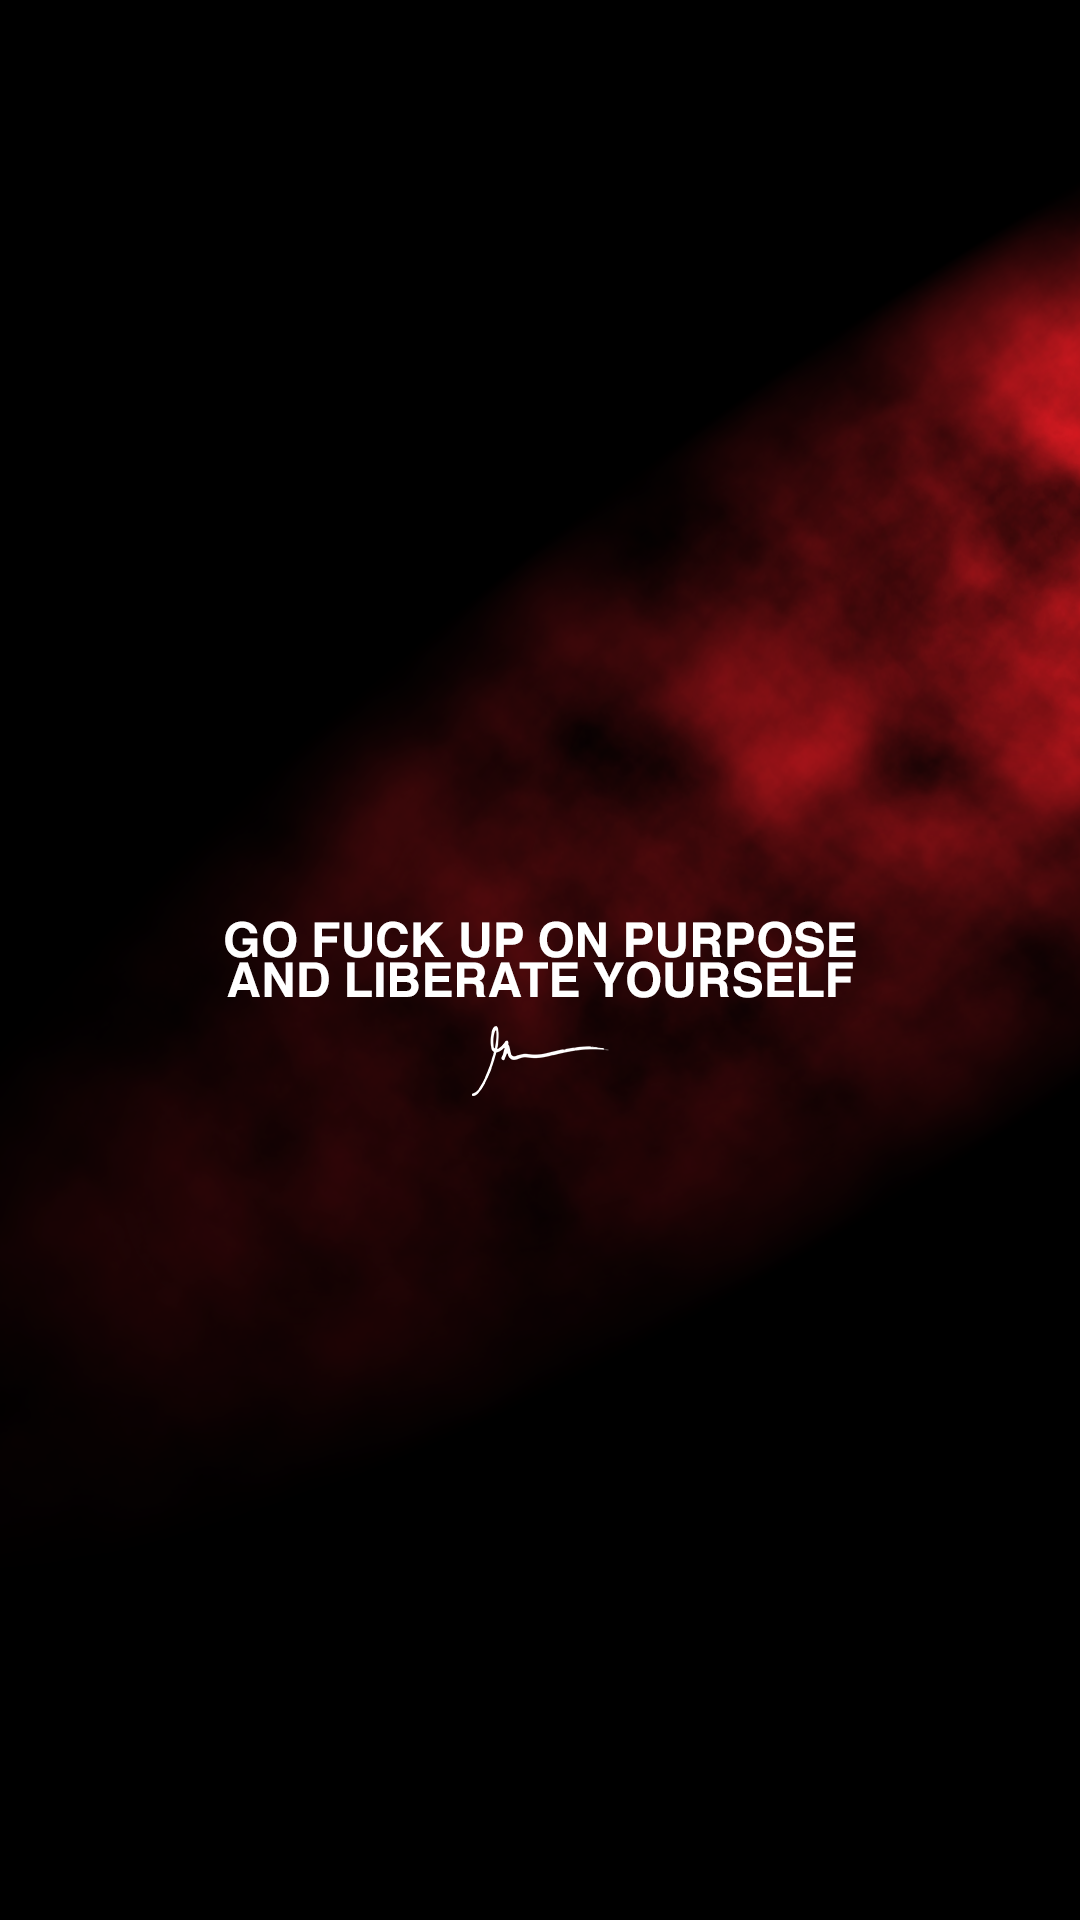 GaryVee WallPapers. Many of you have been asking me for the